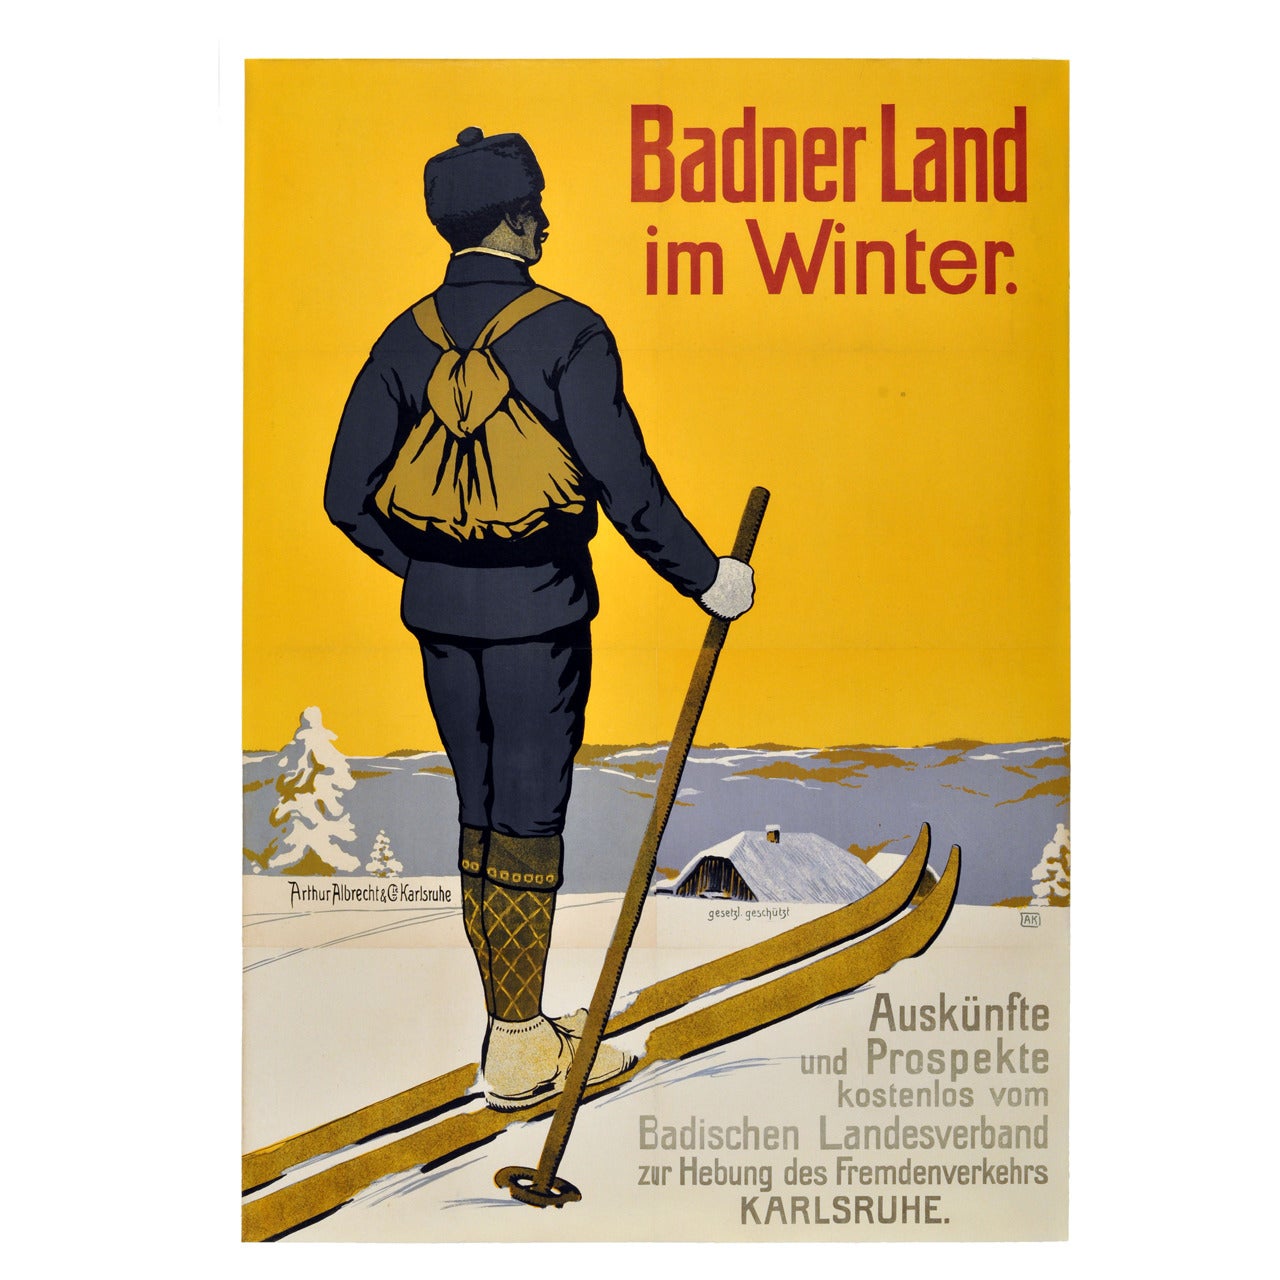 Rare Early, Original Vintage Skiing Poster Promoting Winter in Baden